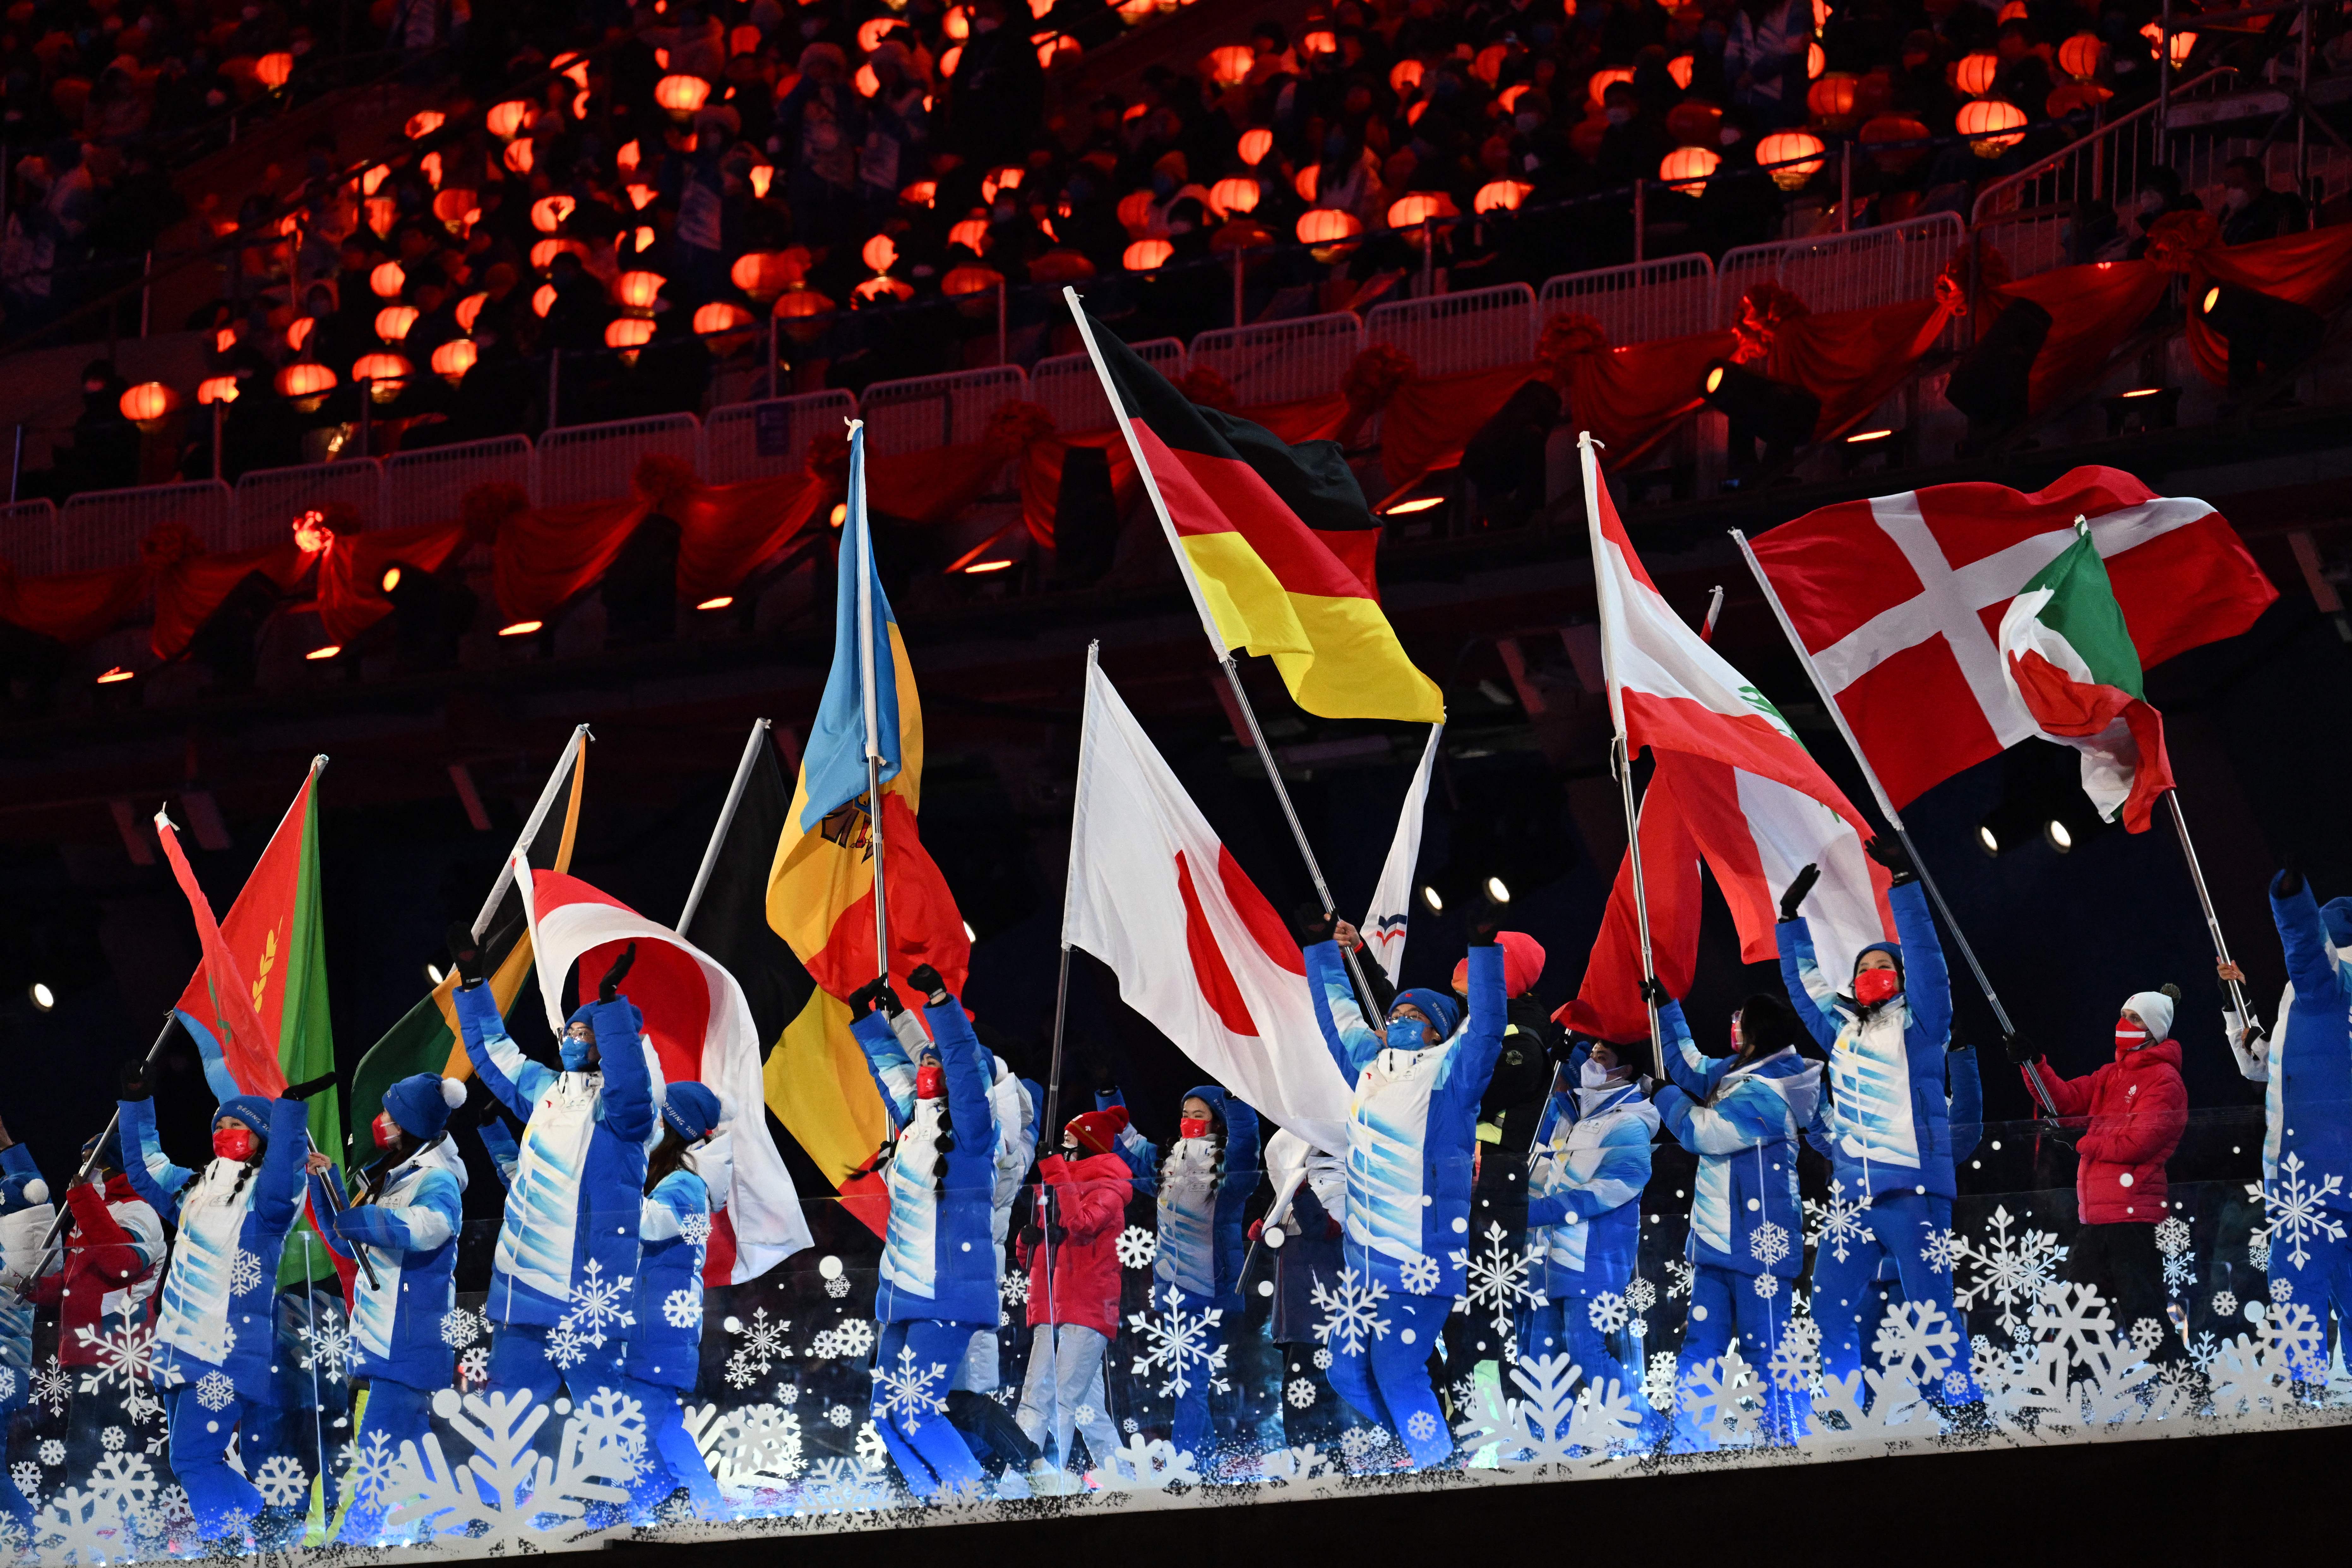 Flagbearers of participating countries parade during the closing ceremony of the Beijing 2022 Winter Olympic Games, in Beijing, China, on February 20.